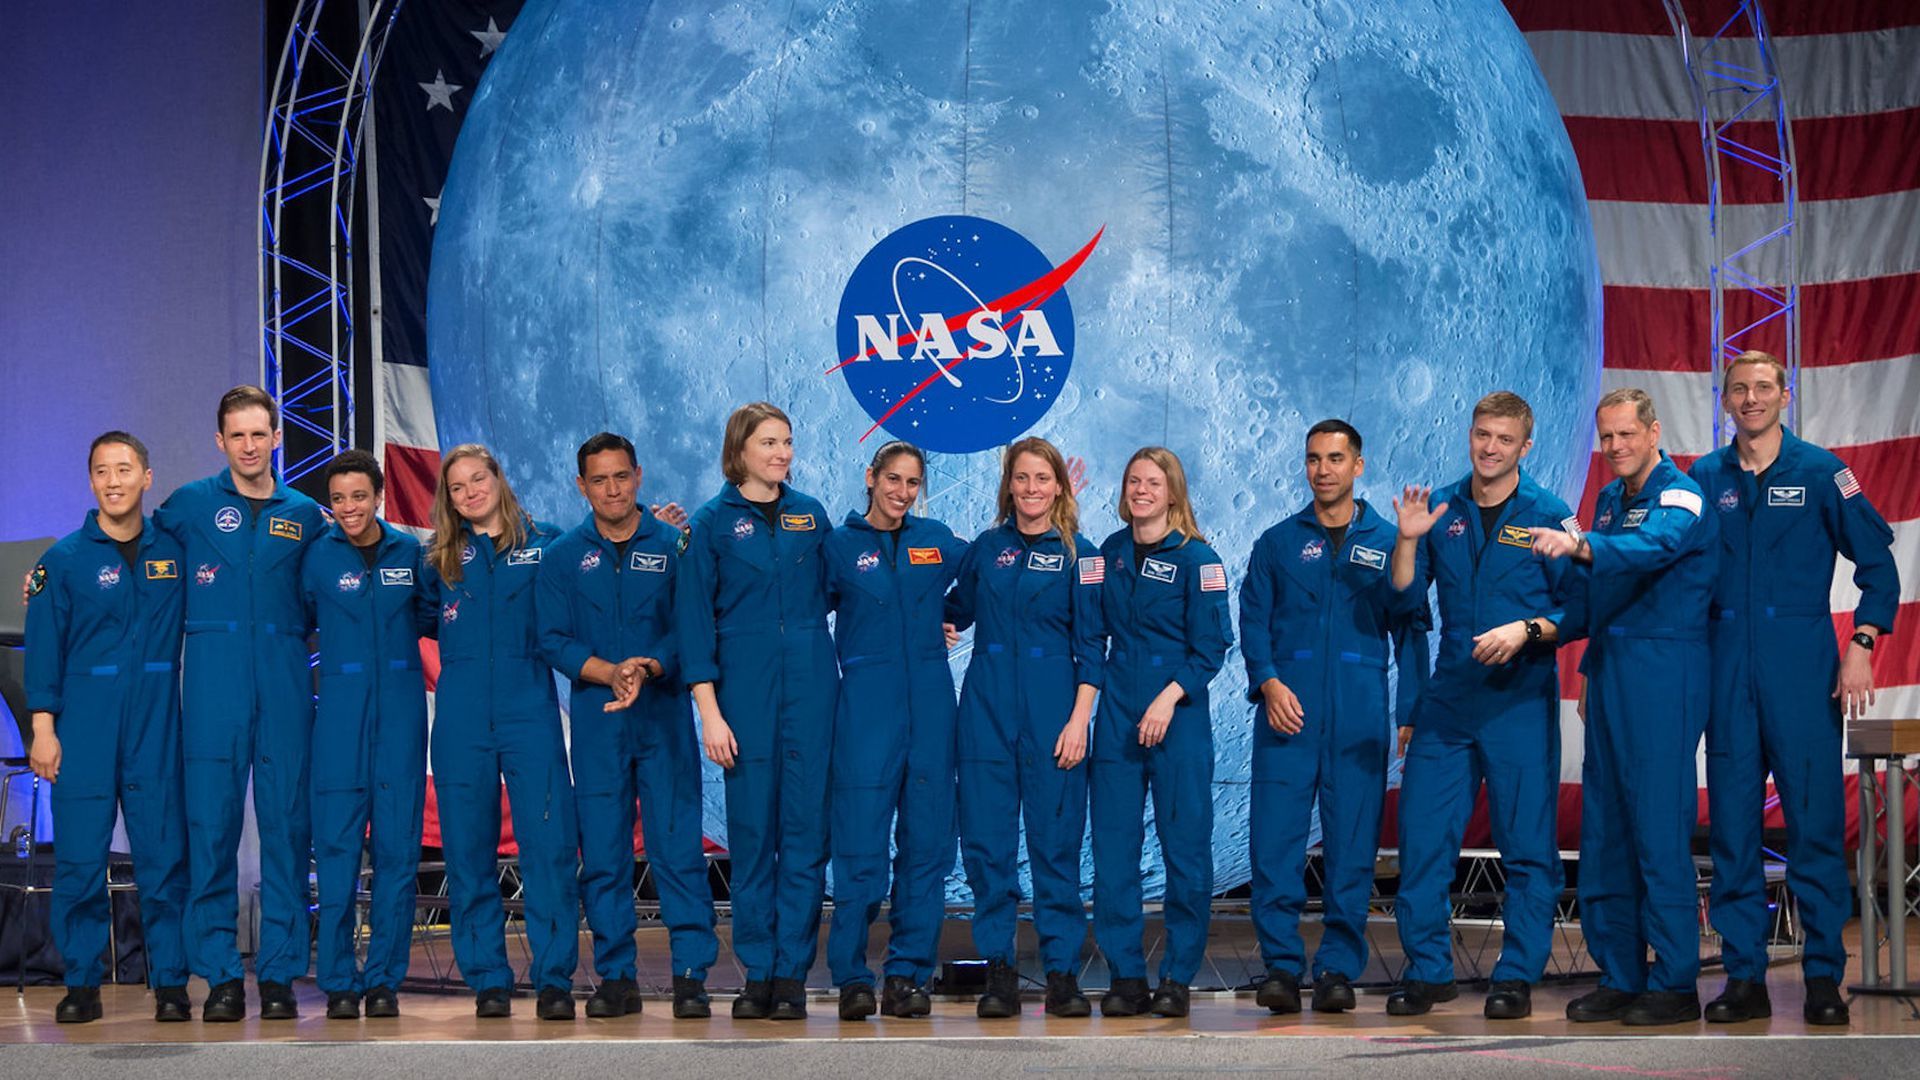 In this image, a line of NASA astronauts stand in front of the NASA logo and the moon